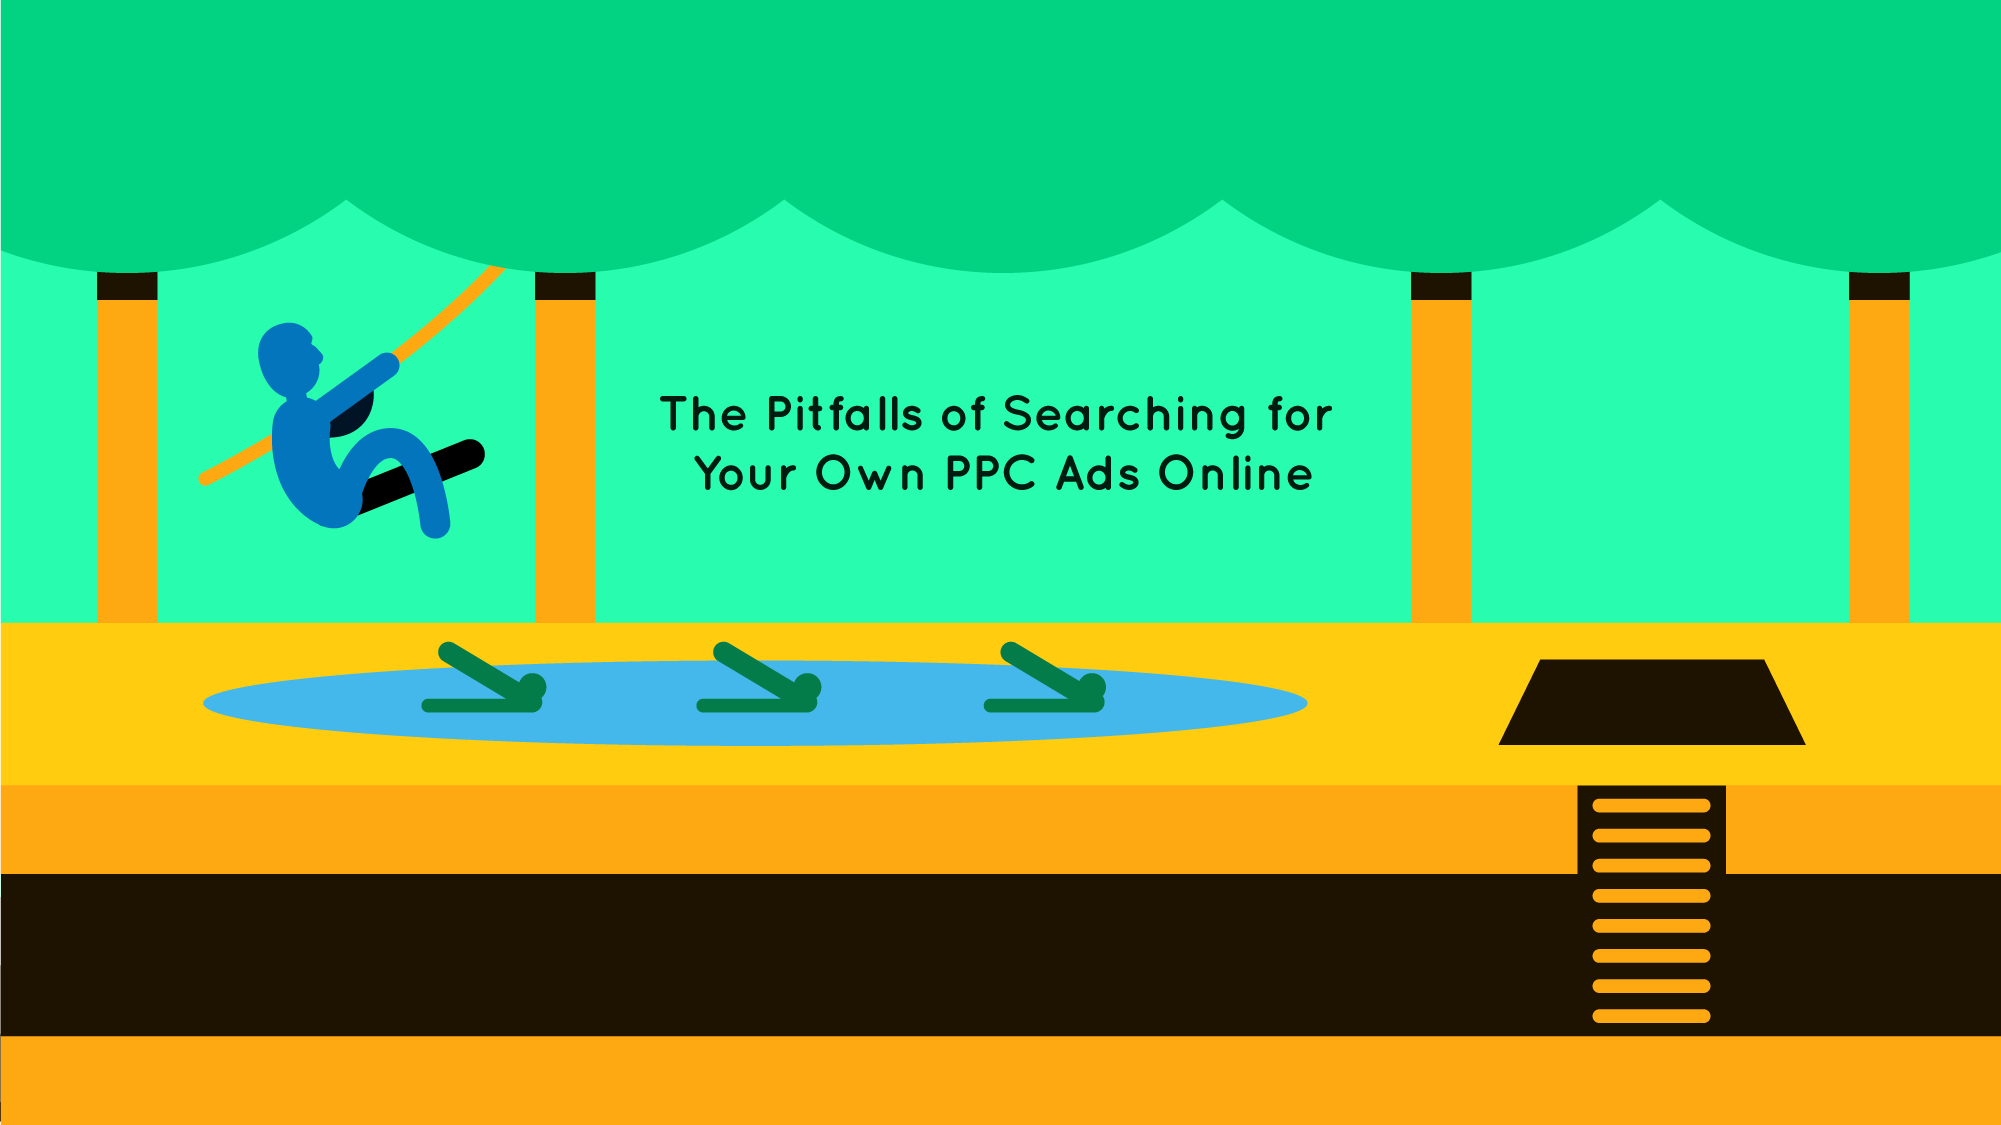 The Pitfalls of Searching for Your Own PPC Ads Online